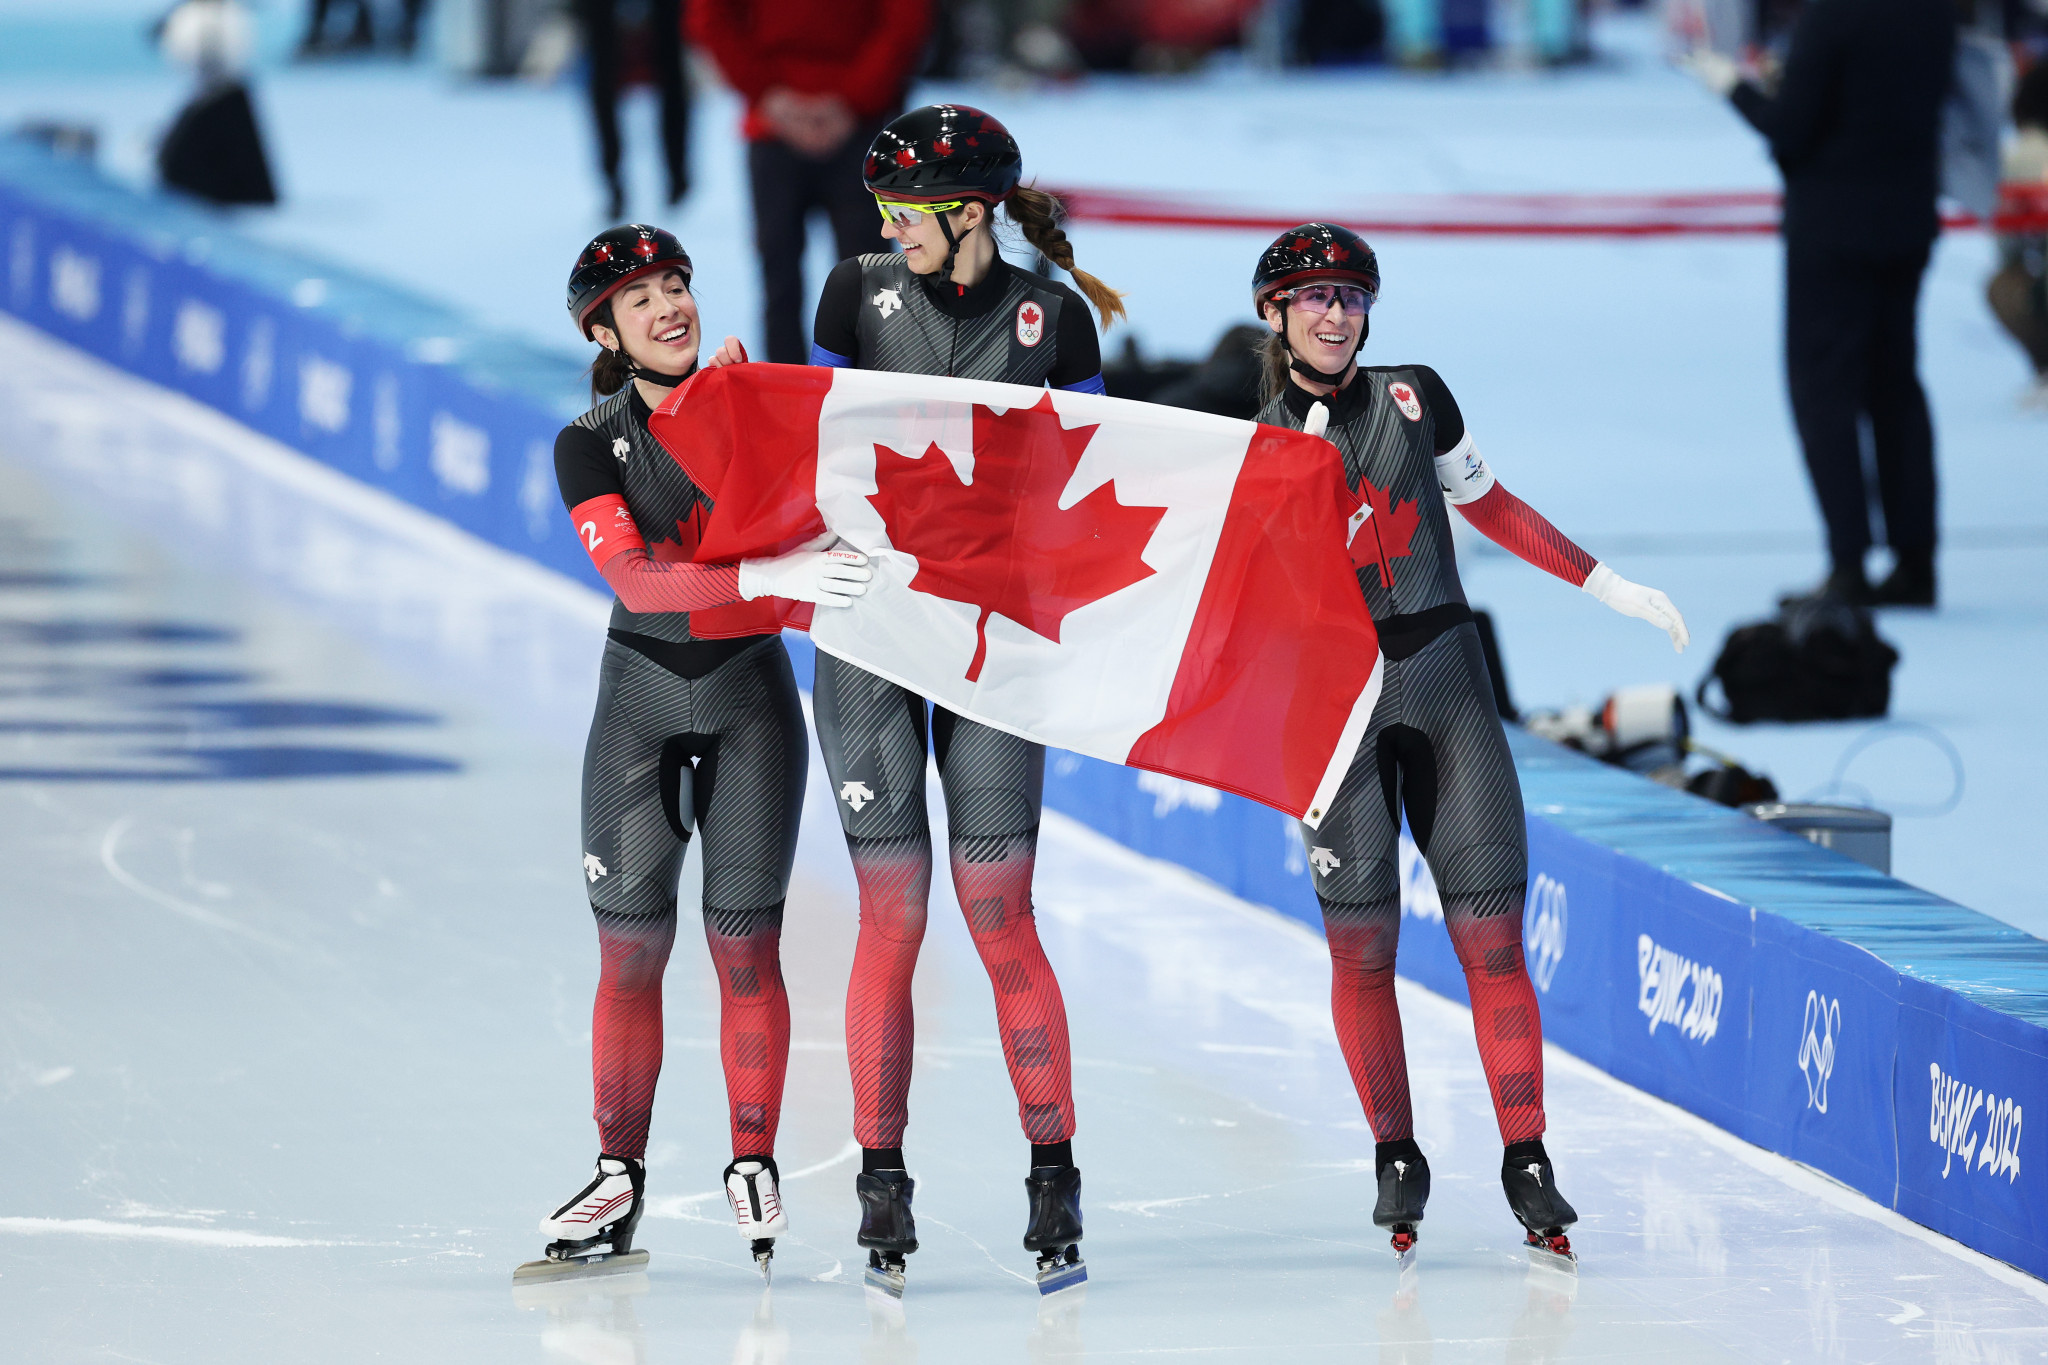 Canadians enjoy first gold in team pursuit speed skating at Beijing 2022